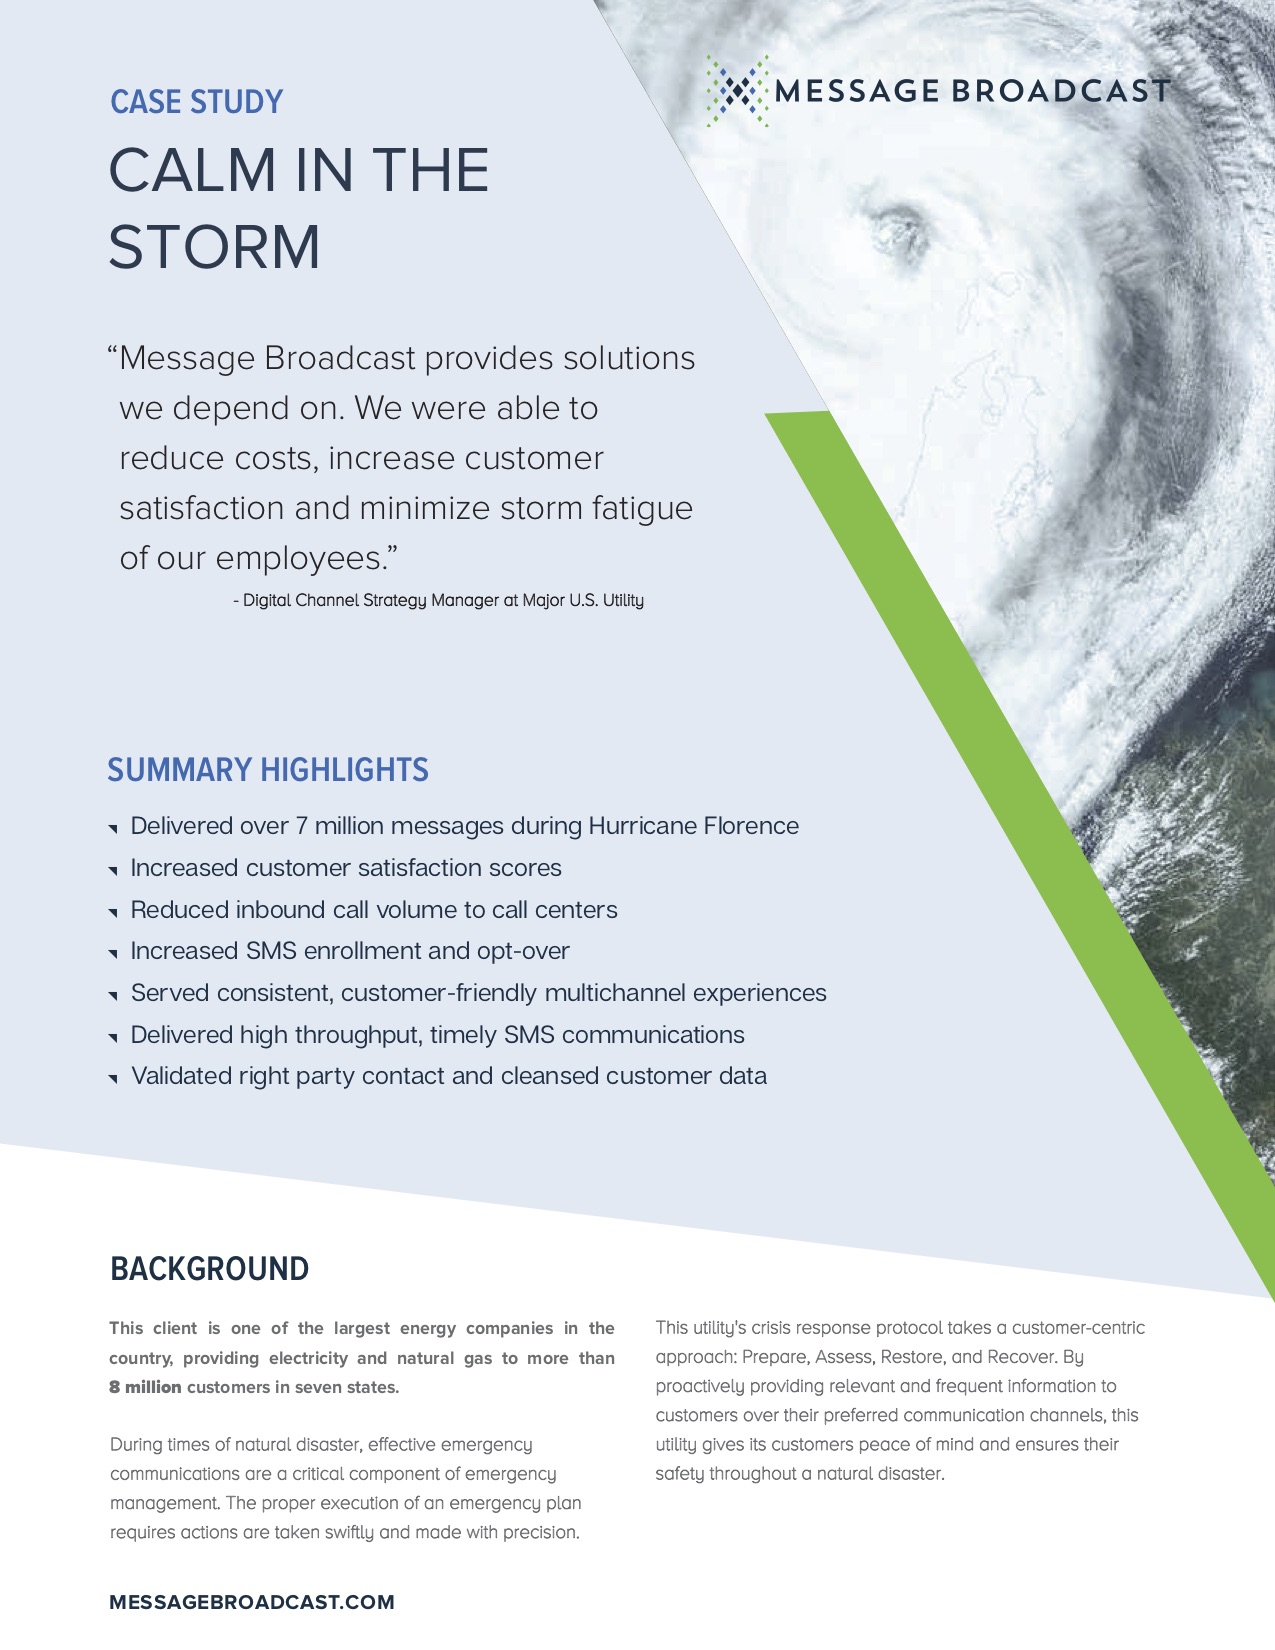 Message_Broadcast_Large_Energy_Company_Hurricane_Outage_CaseStudy-2020